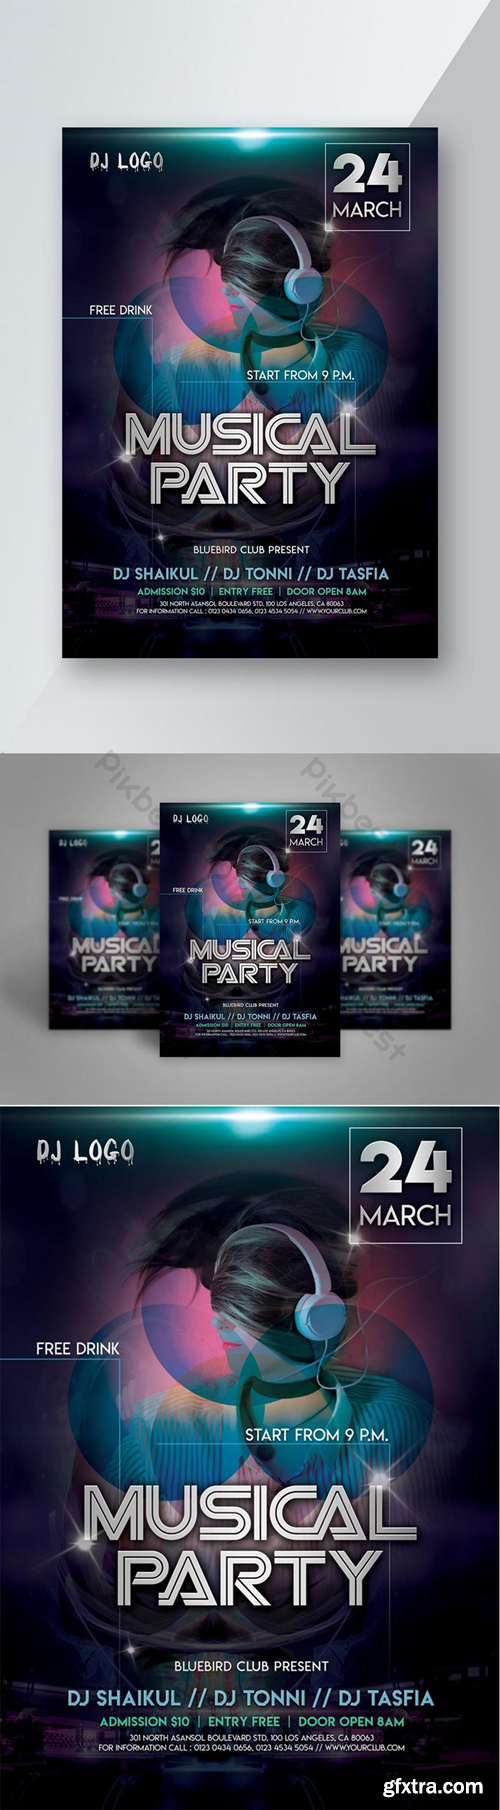 Music Dj Party Flyer/Poster Template PSD